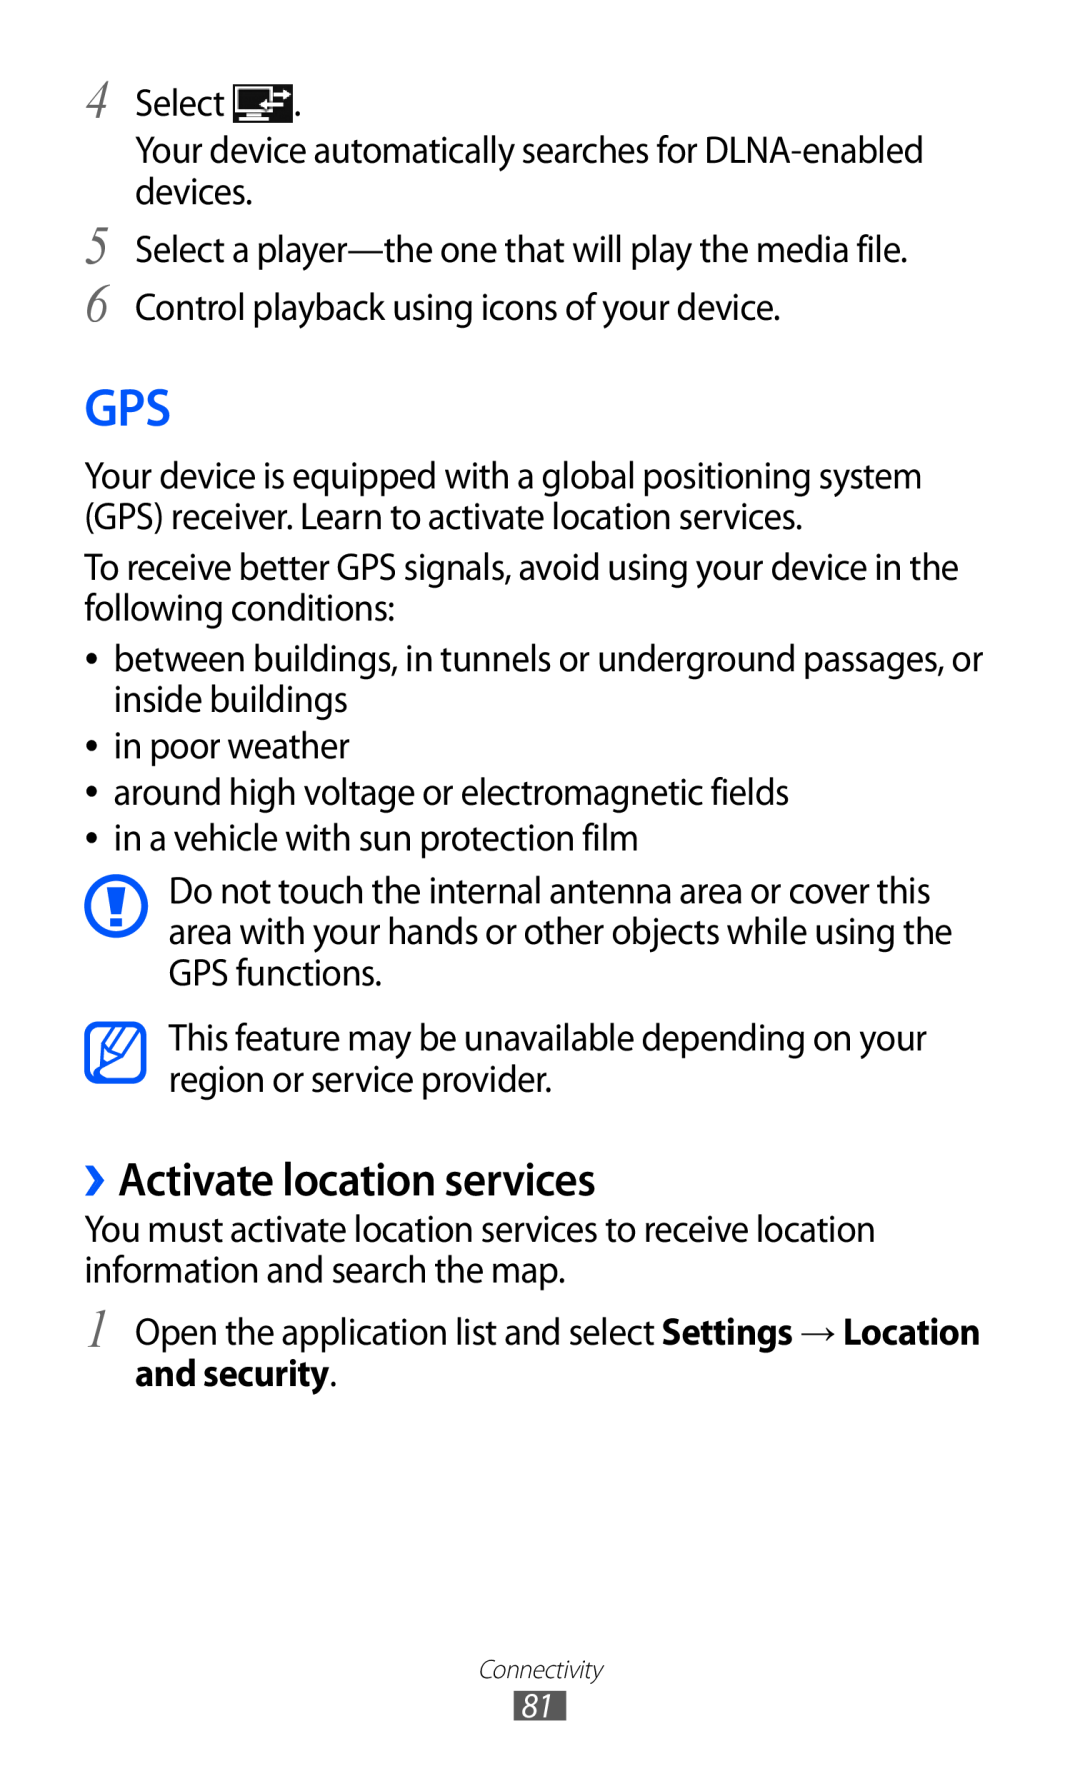 Samsung GT-P7310FKAAUT, GT-P7310FKEXEF, GT-P7310UWEXEF, GT-P7310UWAXEF manual ››Activate location services, and security 